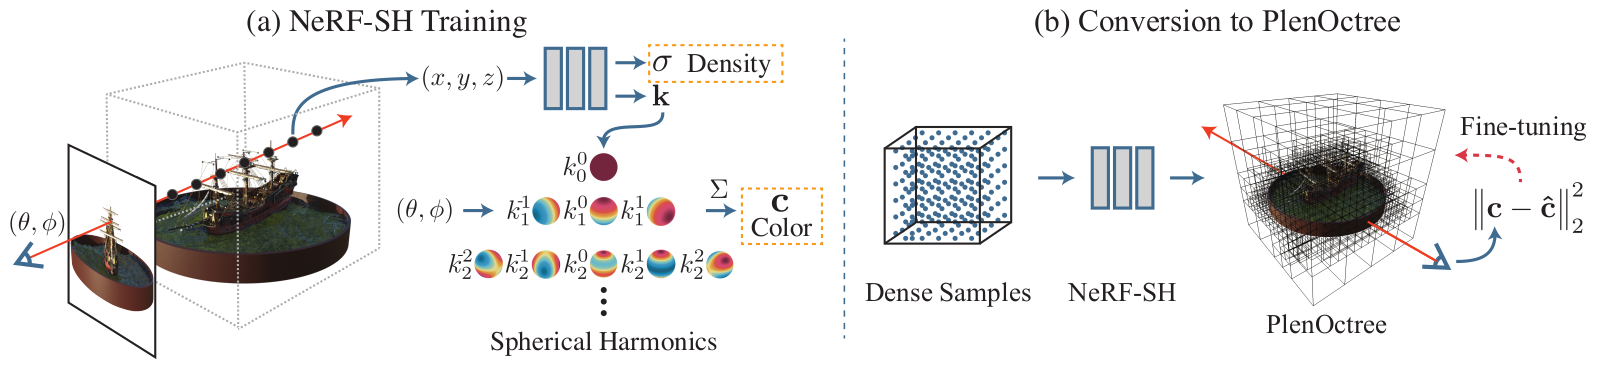 PlenOctrees introduce NeRF-SH that uses spherical harmonics to model view-dependent color, and then compresses that into a octree-like data-structure for rendering the result 3000 faster than NeRF